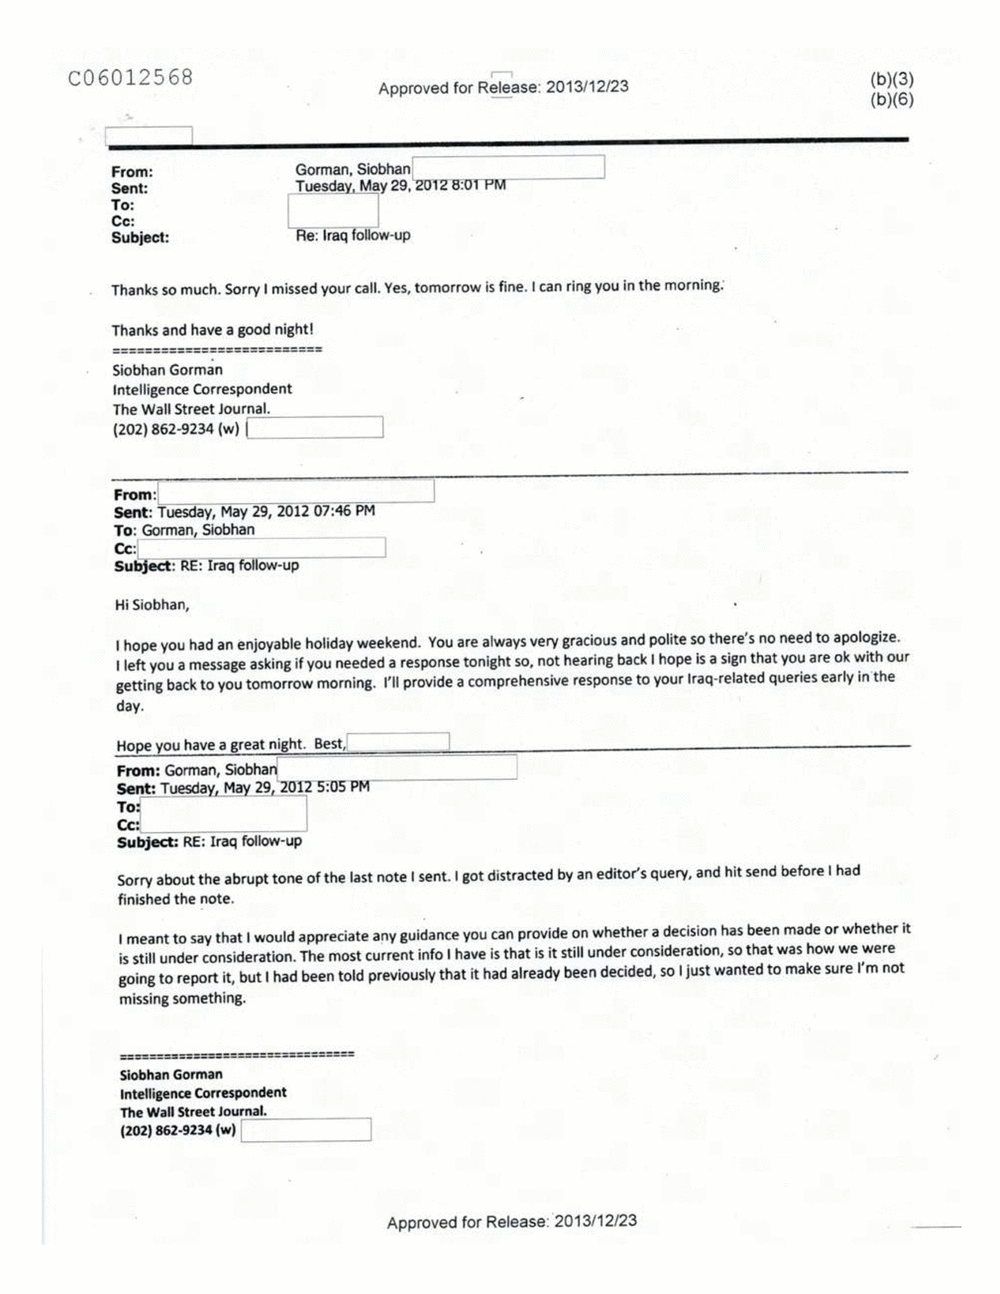 Page 100 from Email Correspondence Between Reporters and CIA Flacks